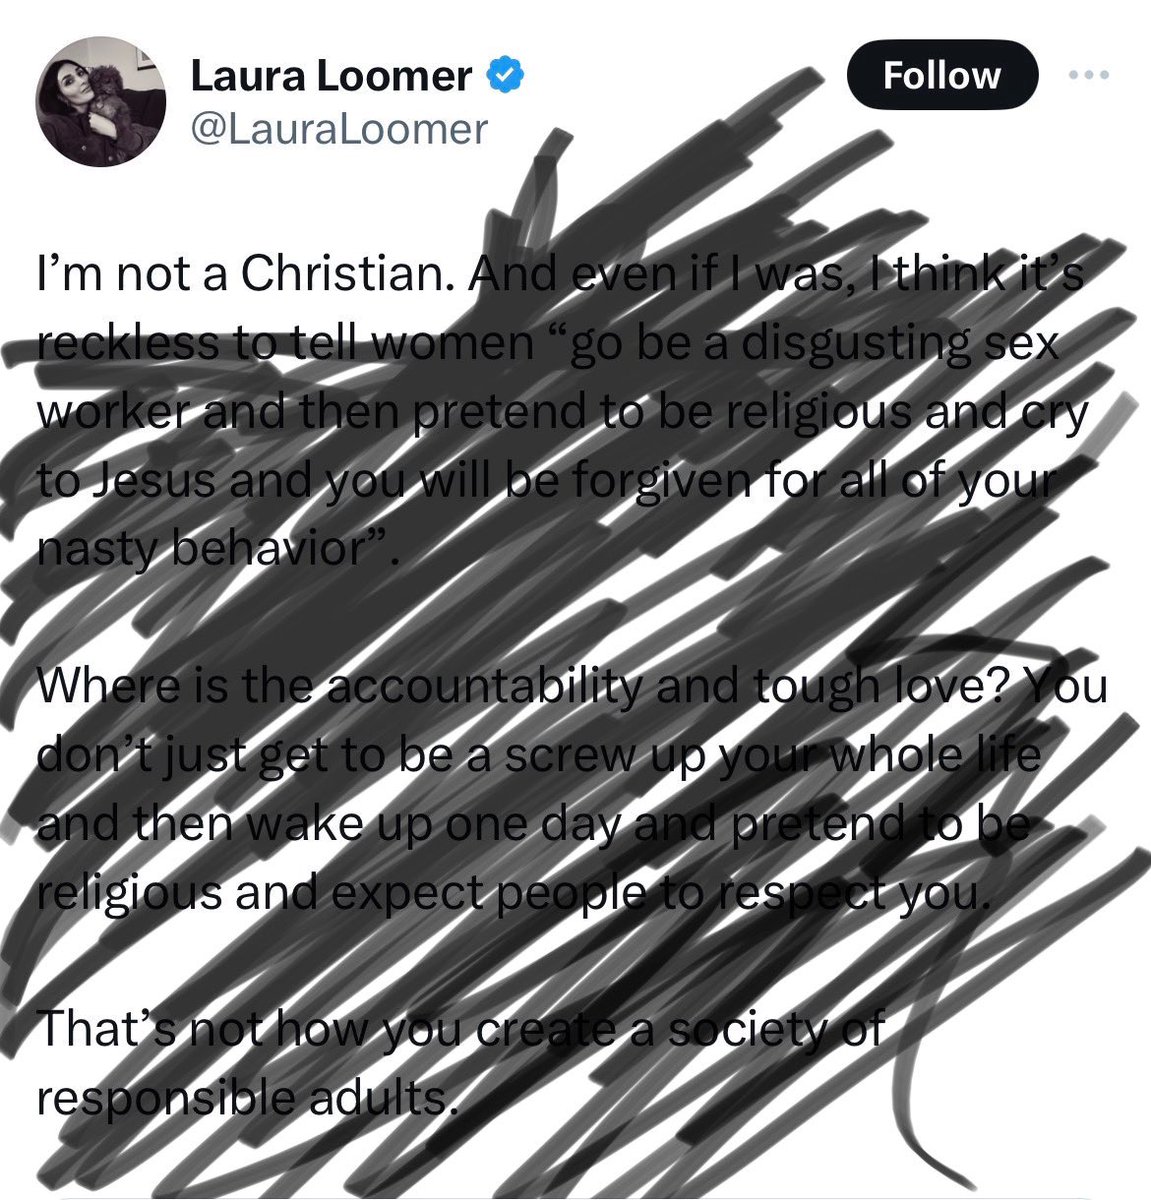 There. Fixed it. Theology, like politics, eludes @LauraLoomer on a rudimentary level. Probably bc she has the IQ of a wet rat. But if you wanna get started lady, we have an excellent Children’s Church.